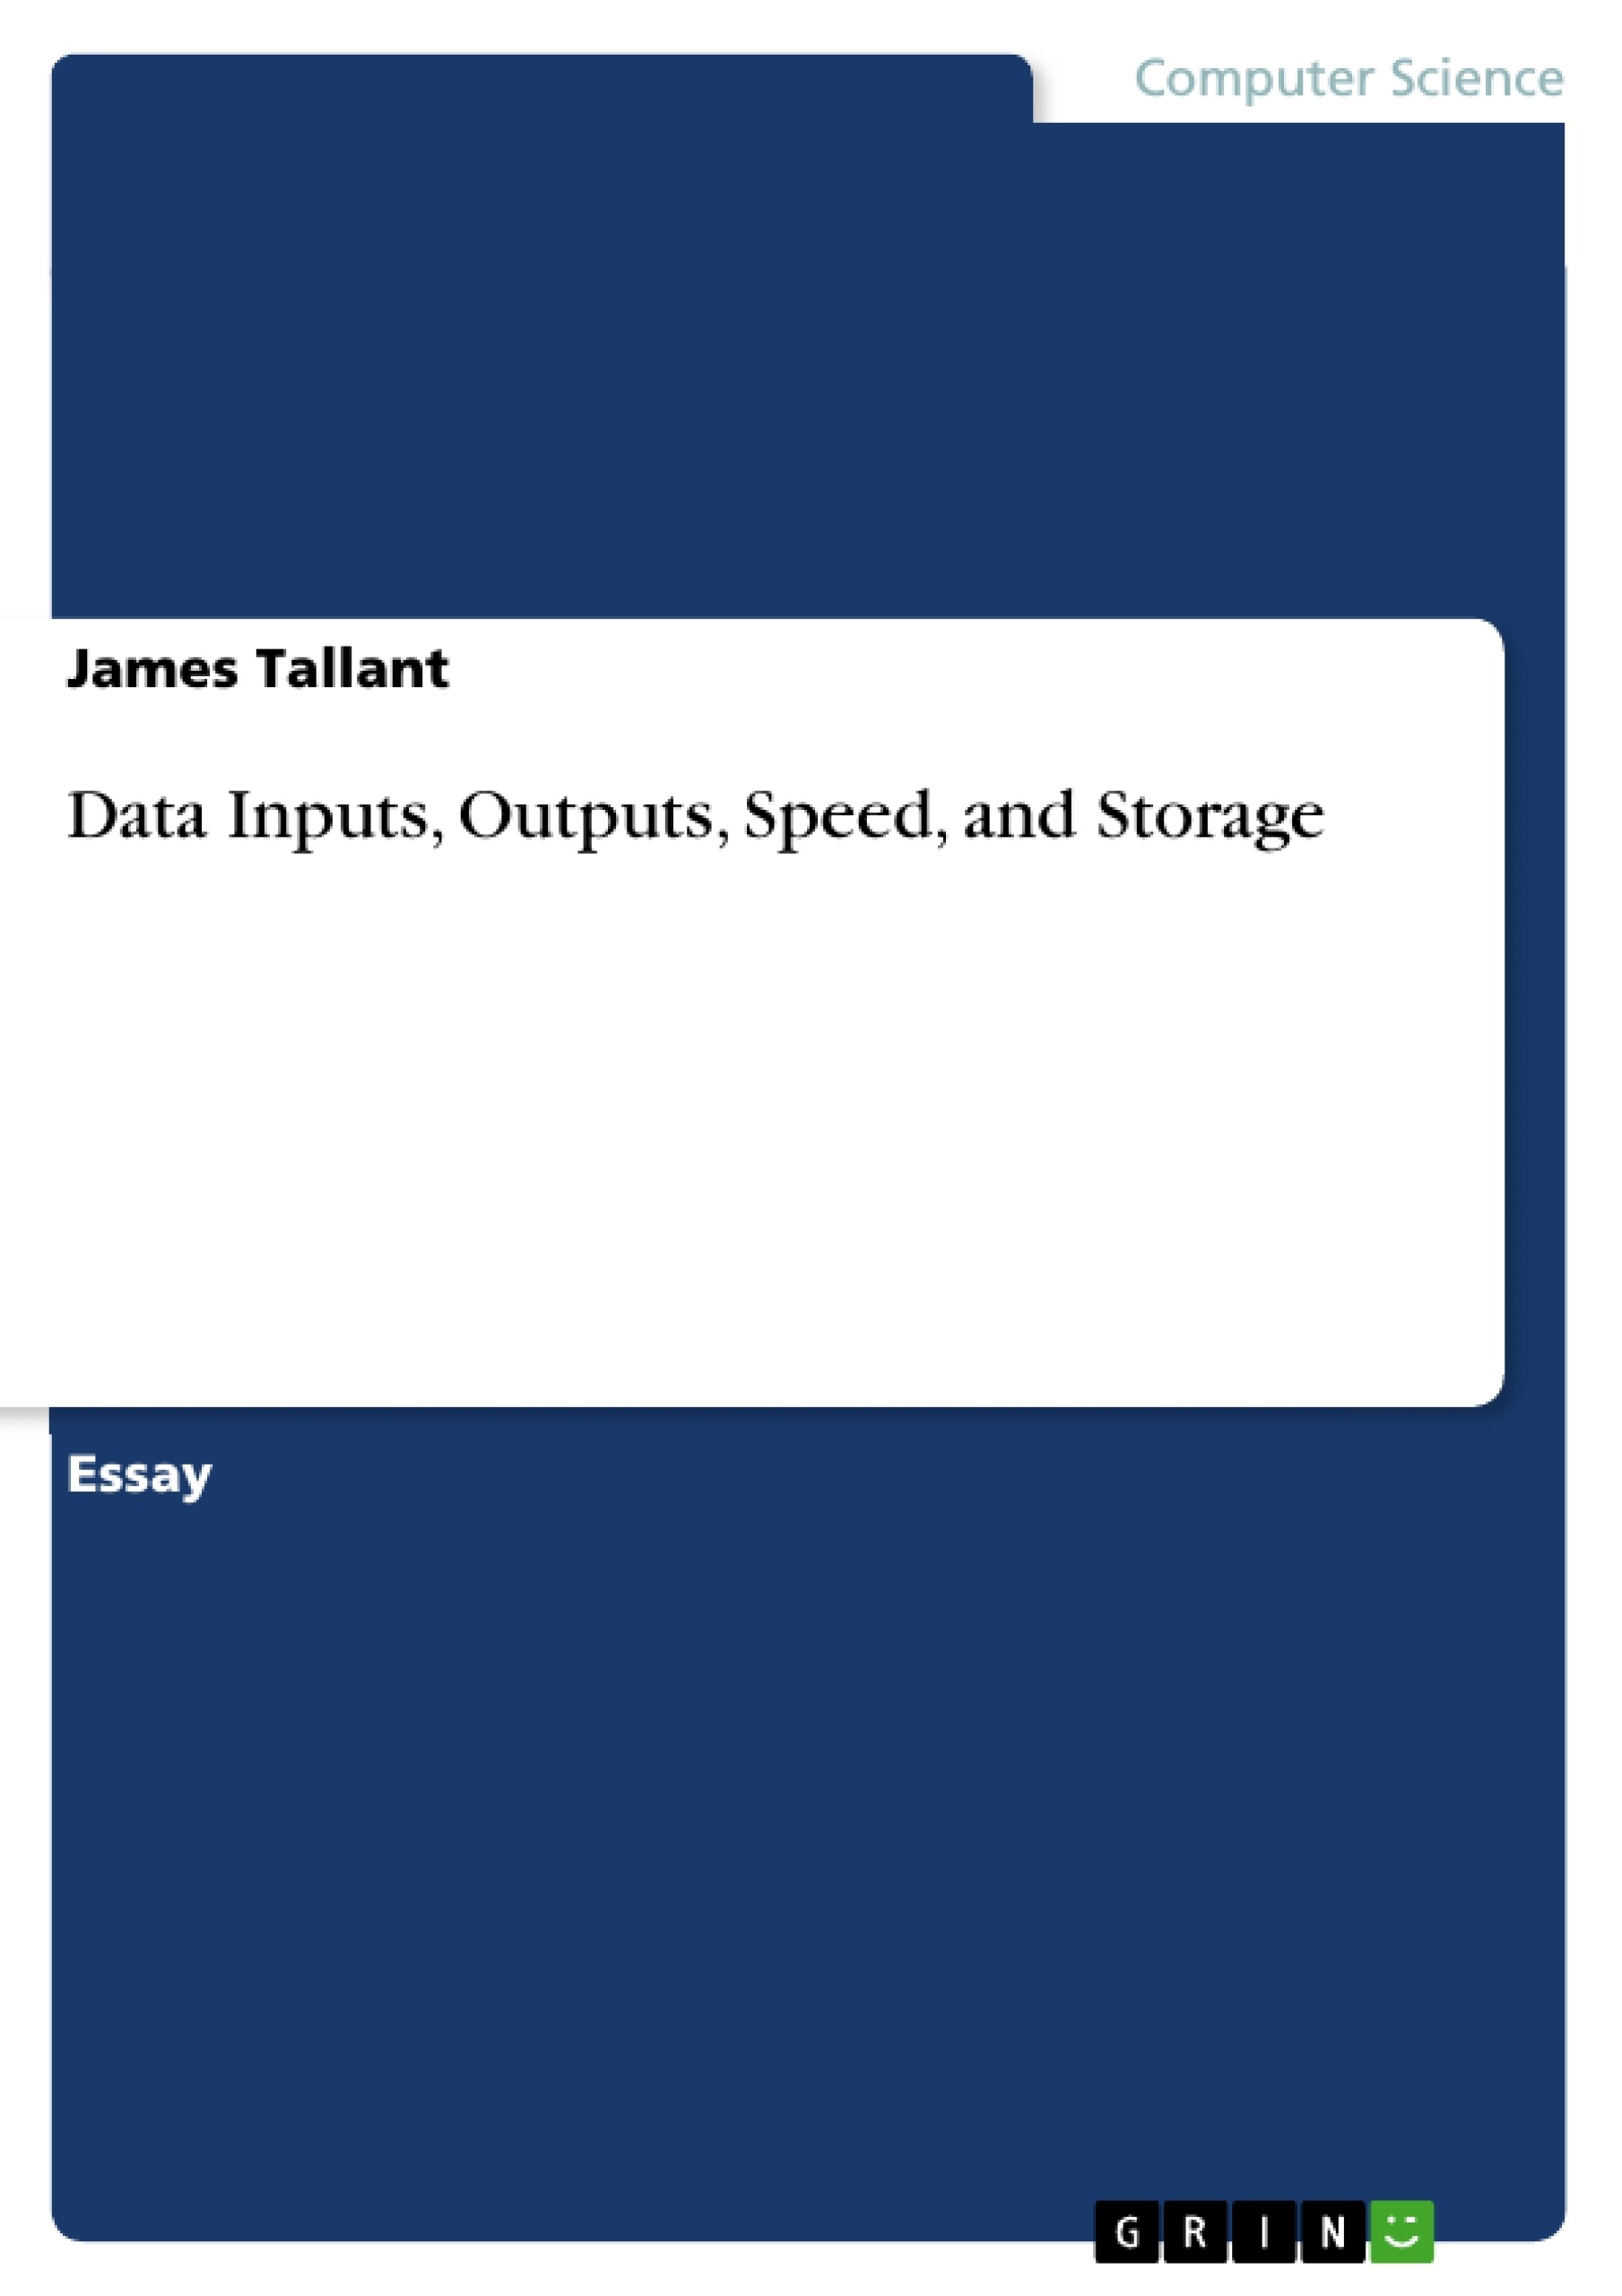 Title: Data Inputs, Outputs, Speed, and Storage